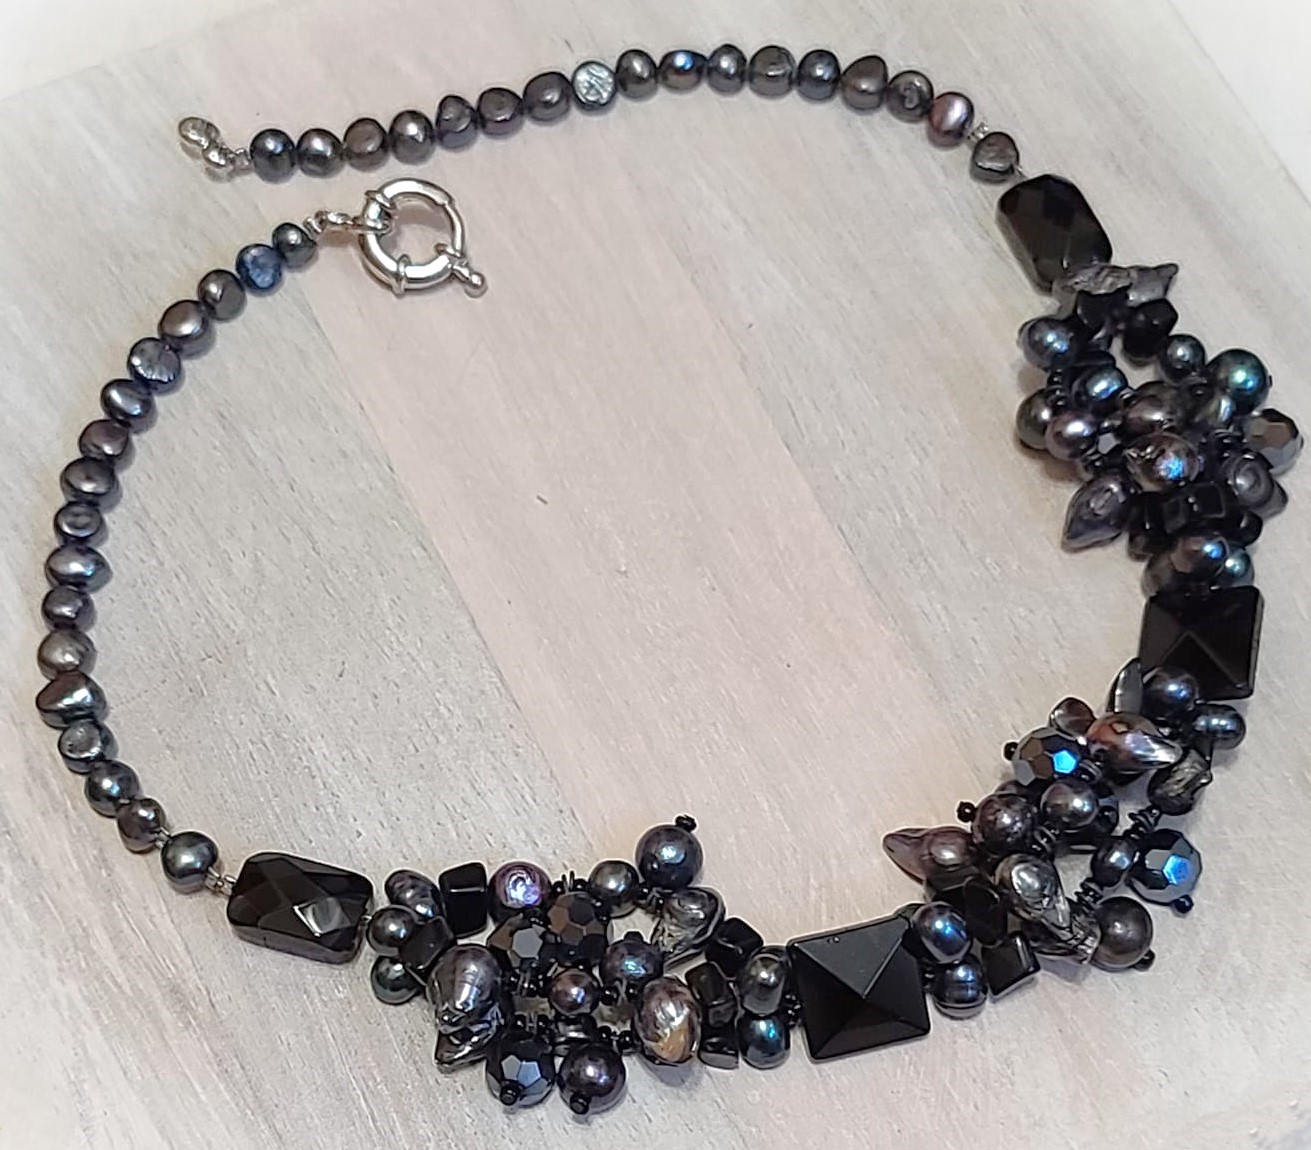 Peacock Pearl & Freshwater Pearls, Black Onyx Twist Necklace